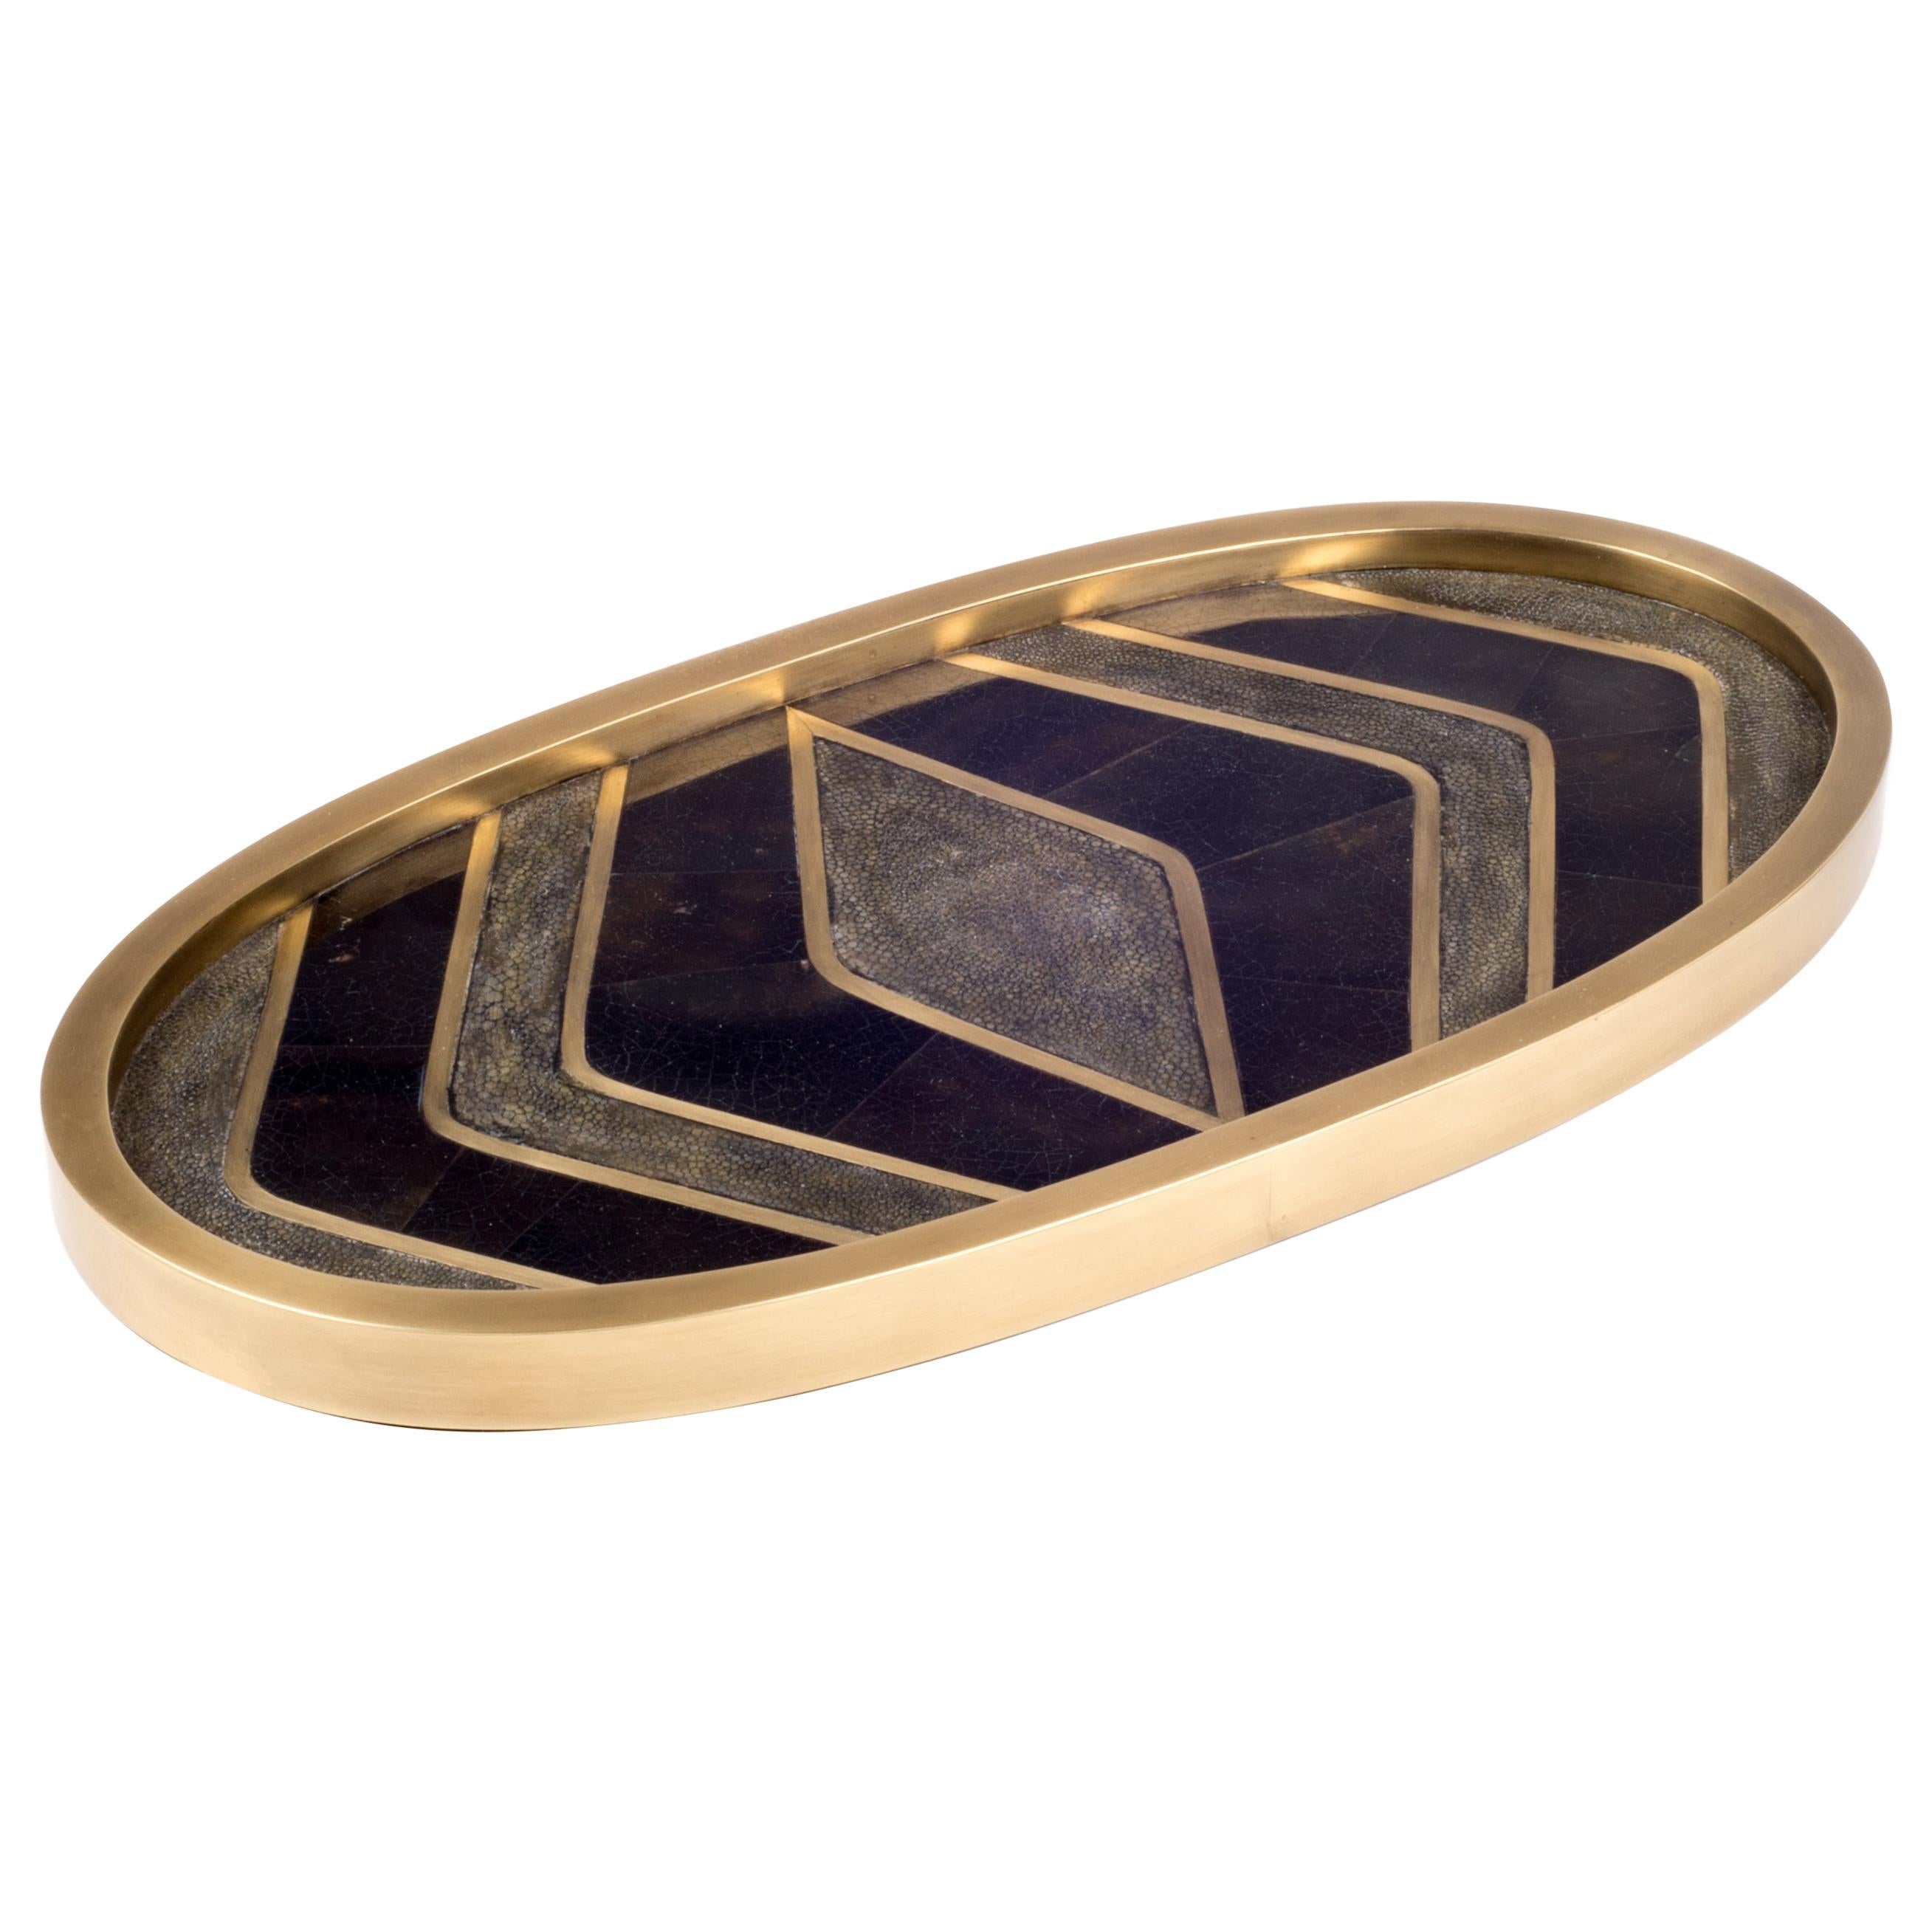 Shagreen Tray with Mix Inlay Pattern including Shell and Brass by Kifu, Paris